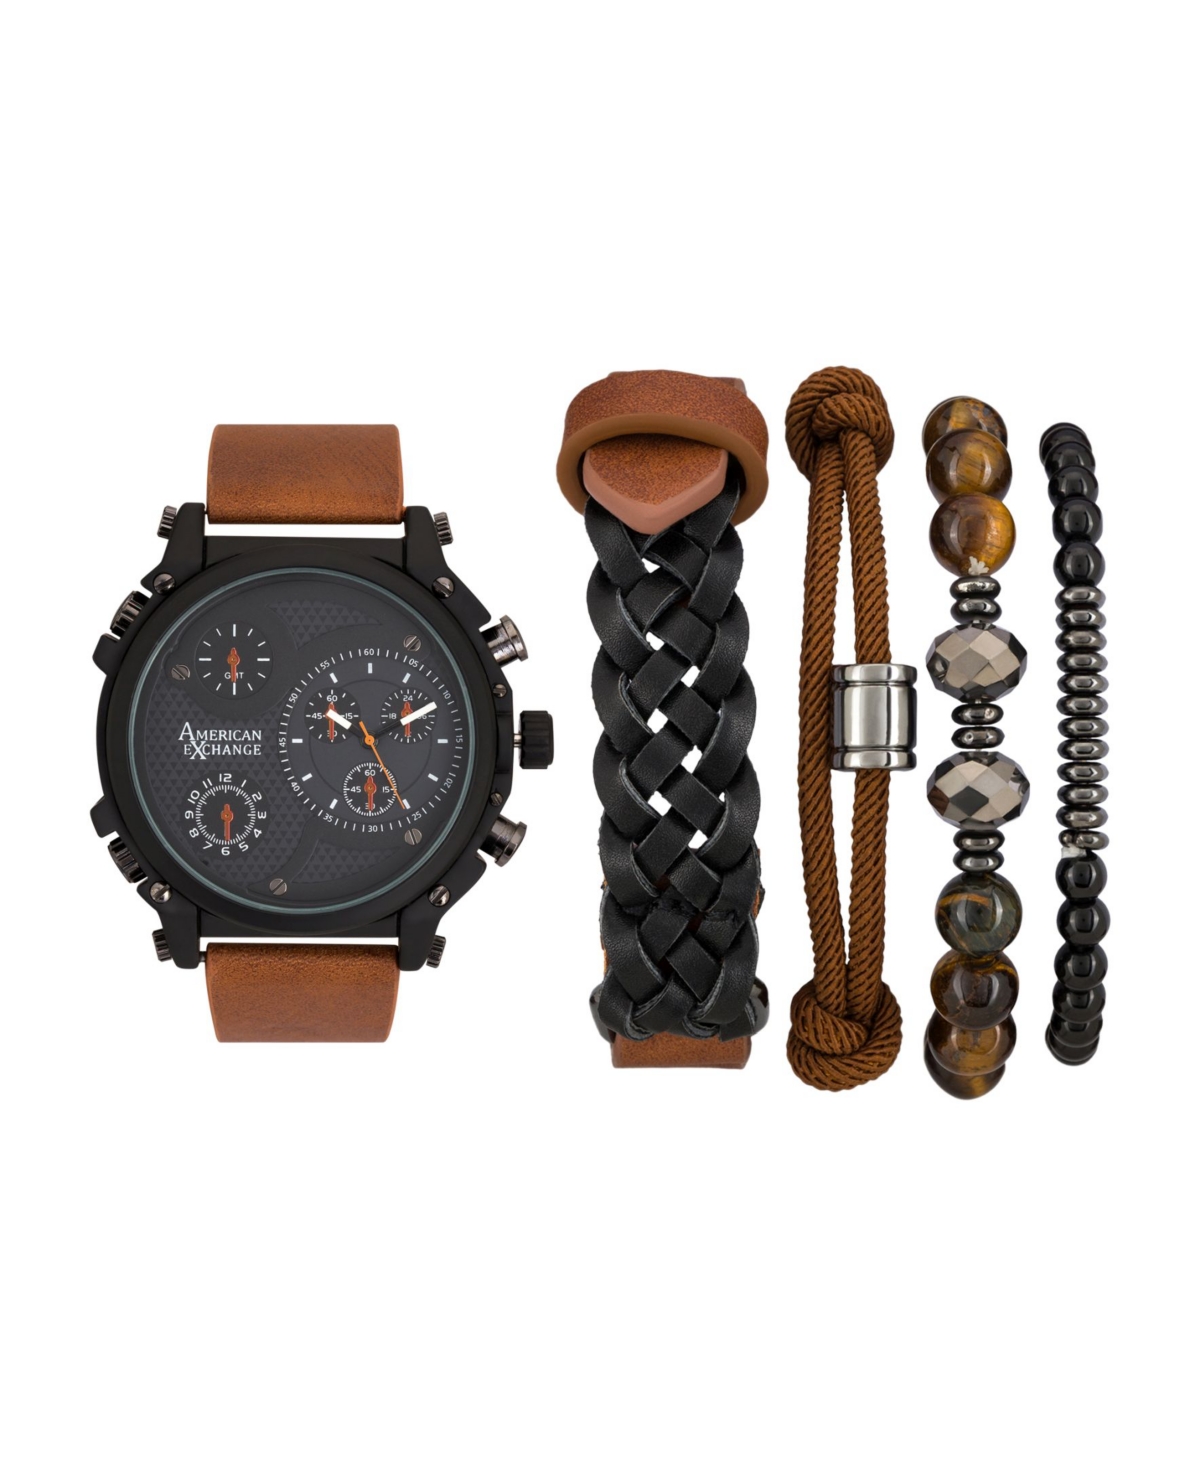 Men's Quartz Dial Brown Leather Strap Watch, 48mm and Assorted Stackable Bracelets Gift Set, Set of 5 - Brown